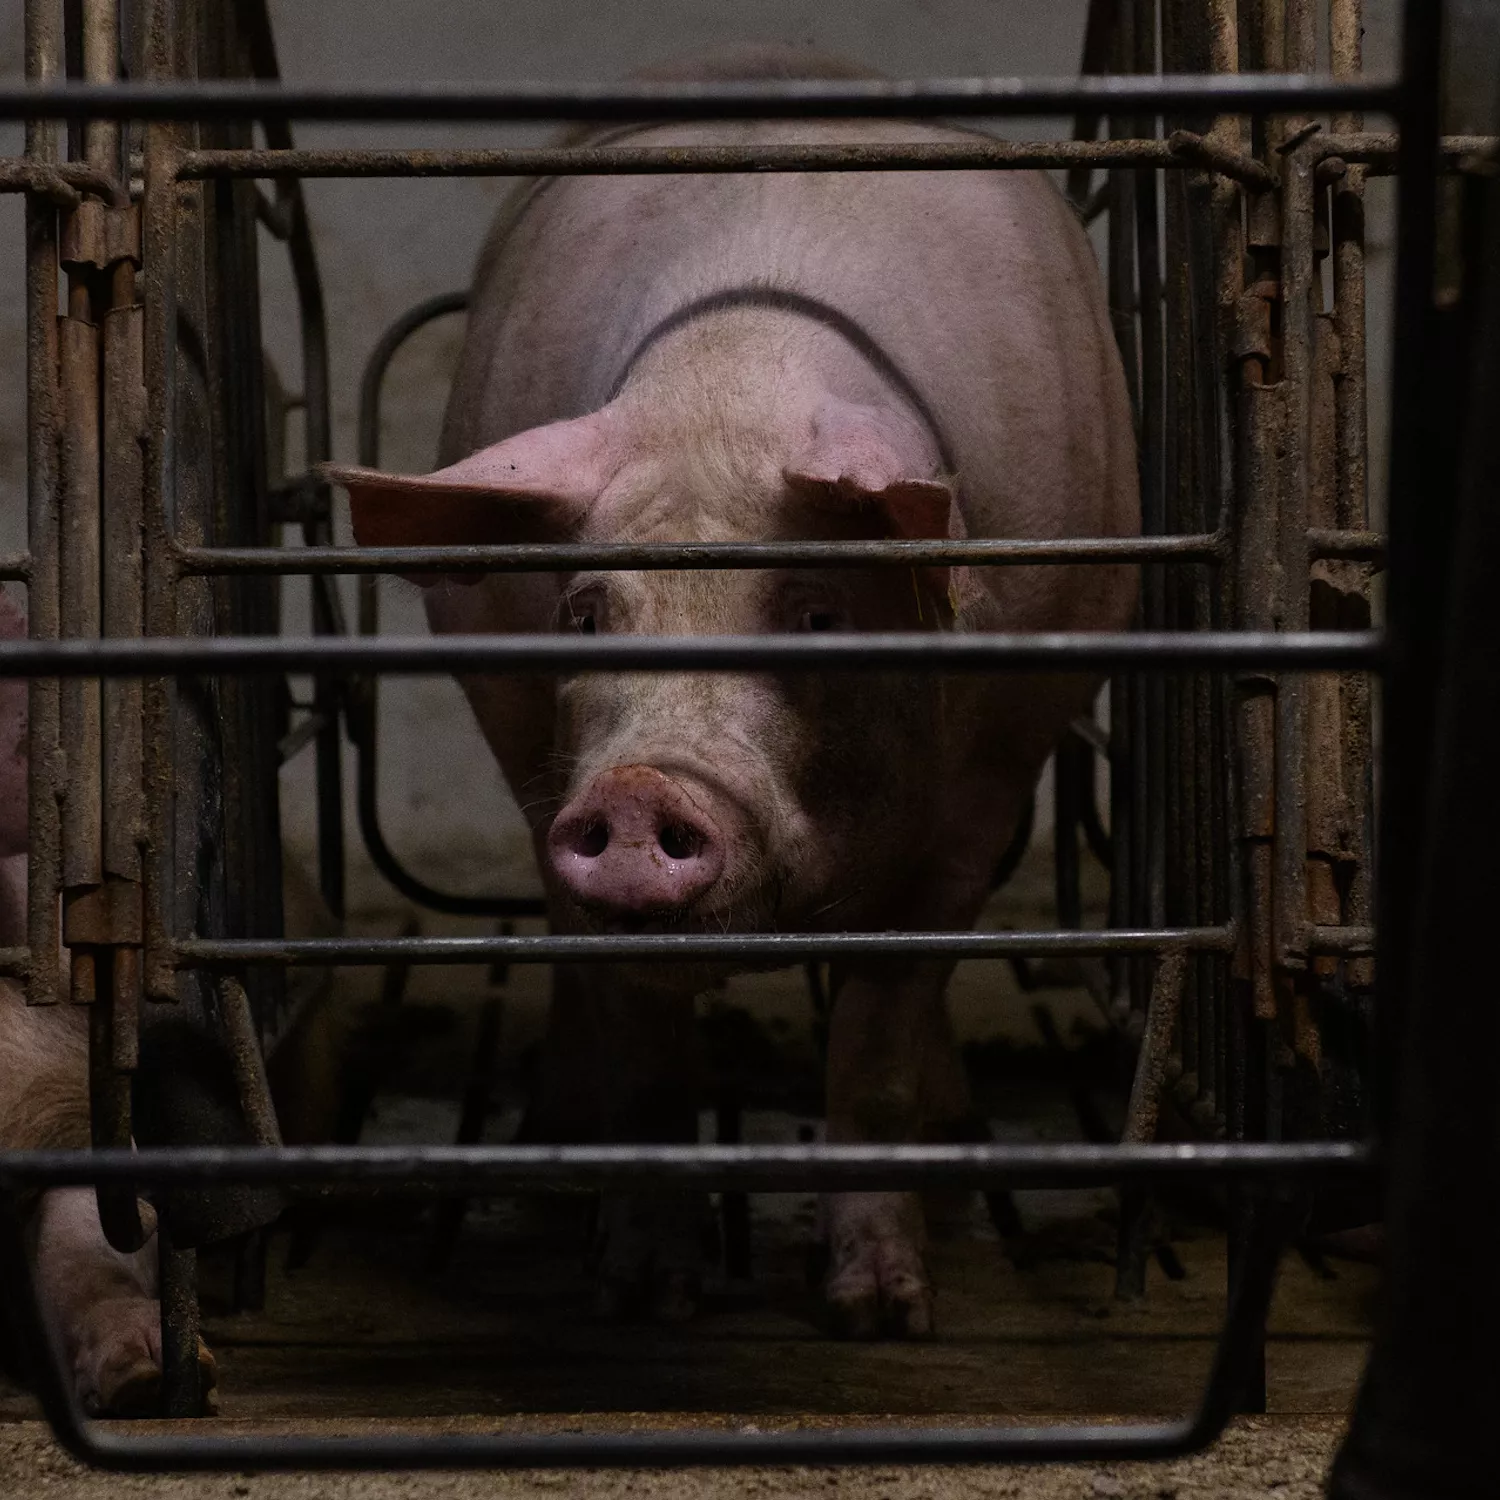 Pregnant pig in a cage looking sad and stressed.